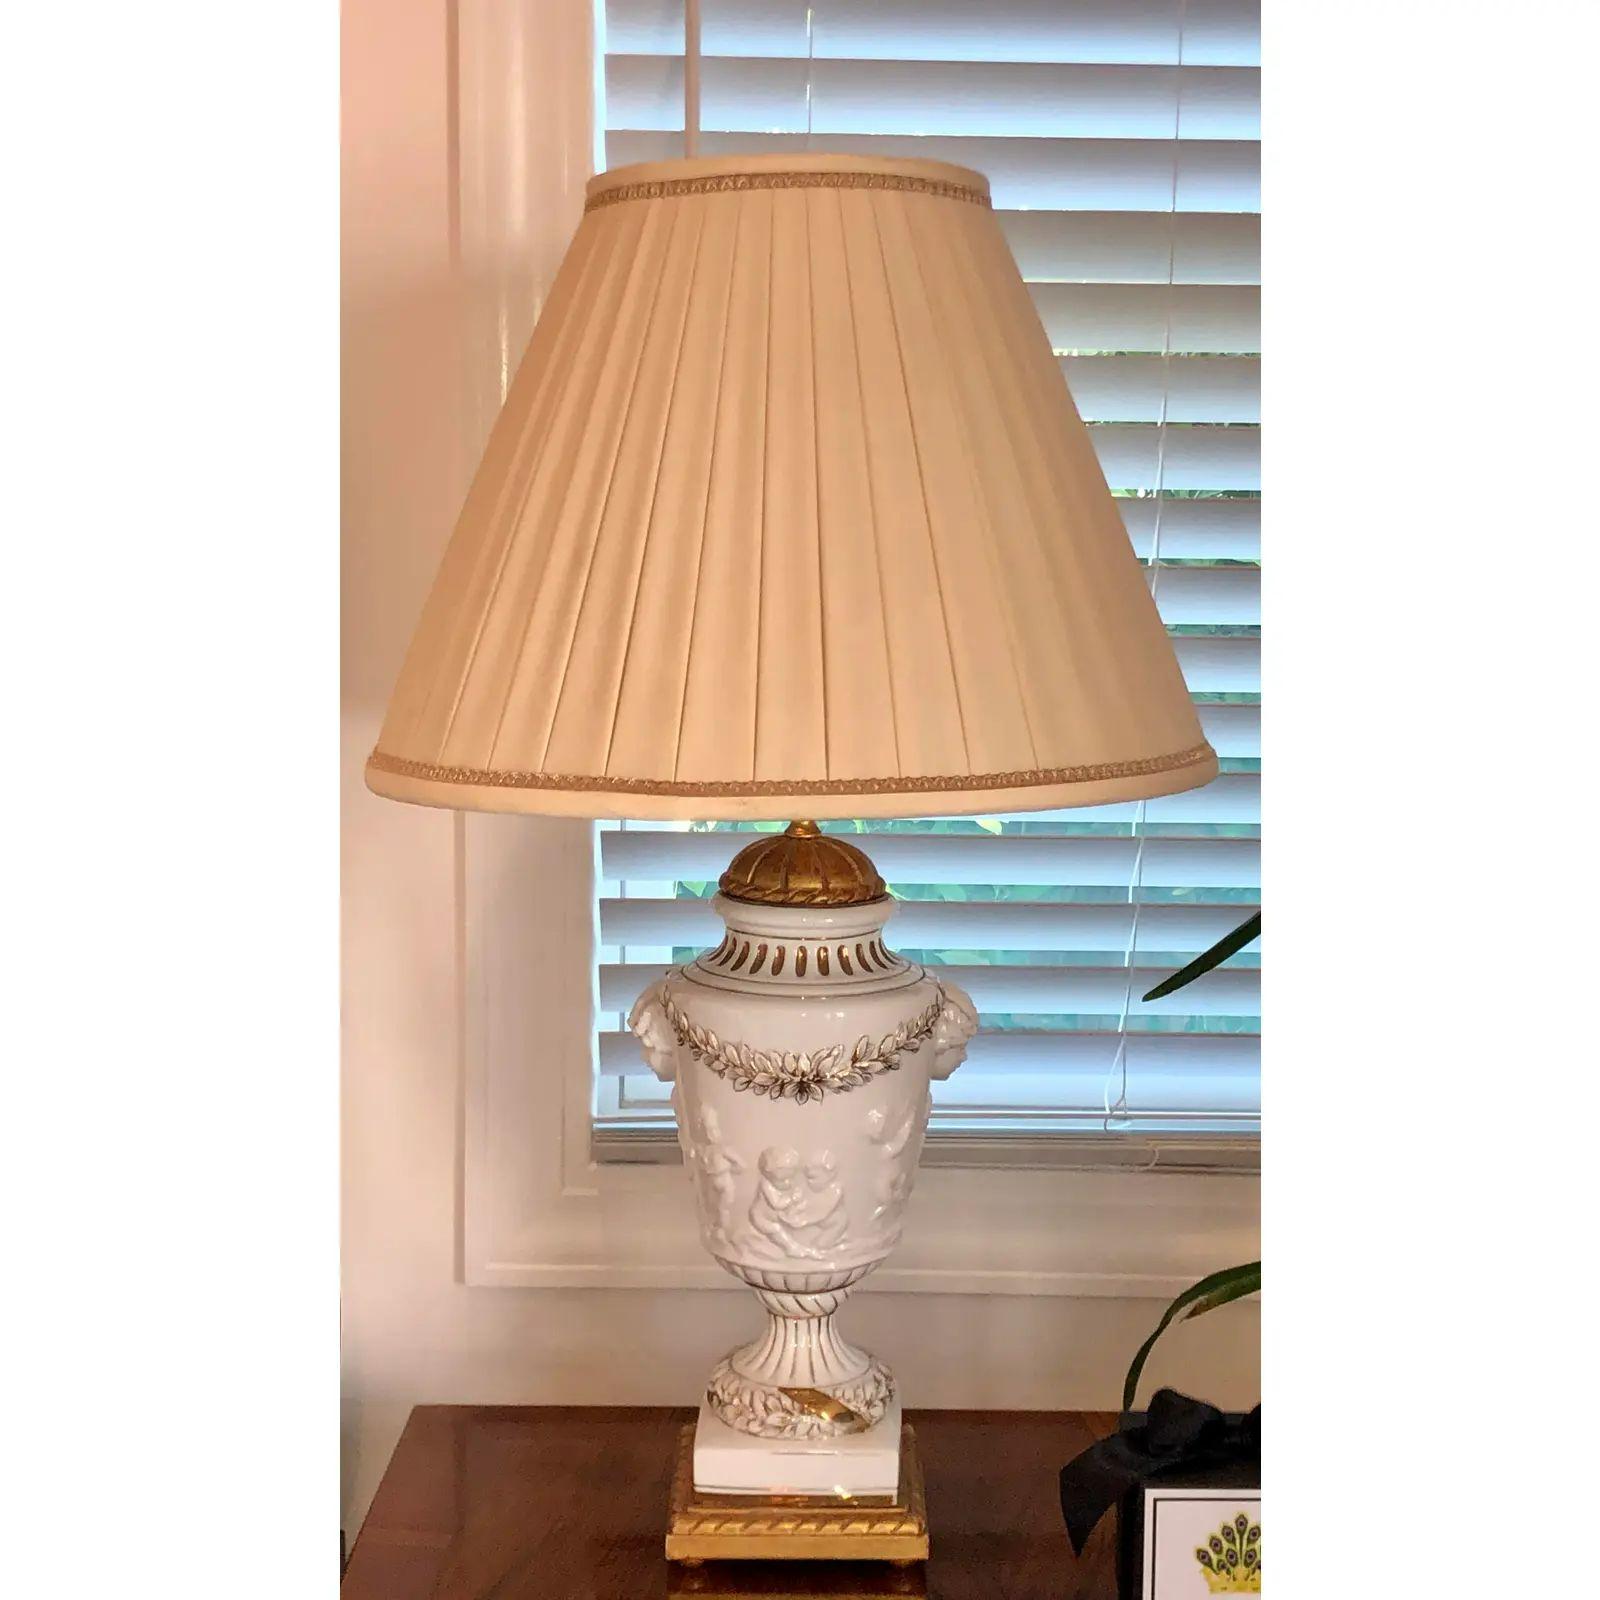 Pair of Italian Porcelain Urn Form Designer Cherub Lamps.
Total height 30”.
Each base measures 16' tall by 8